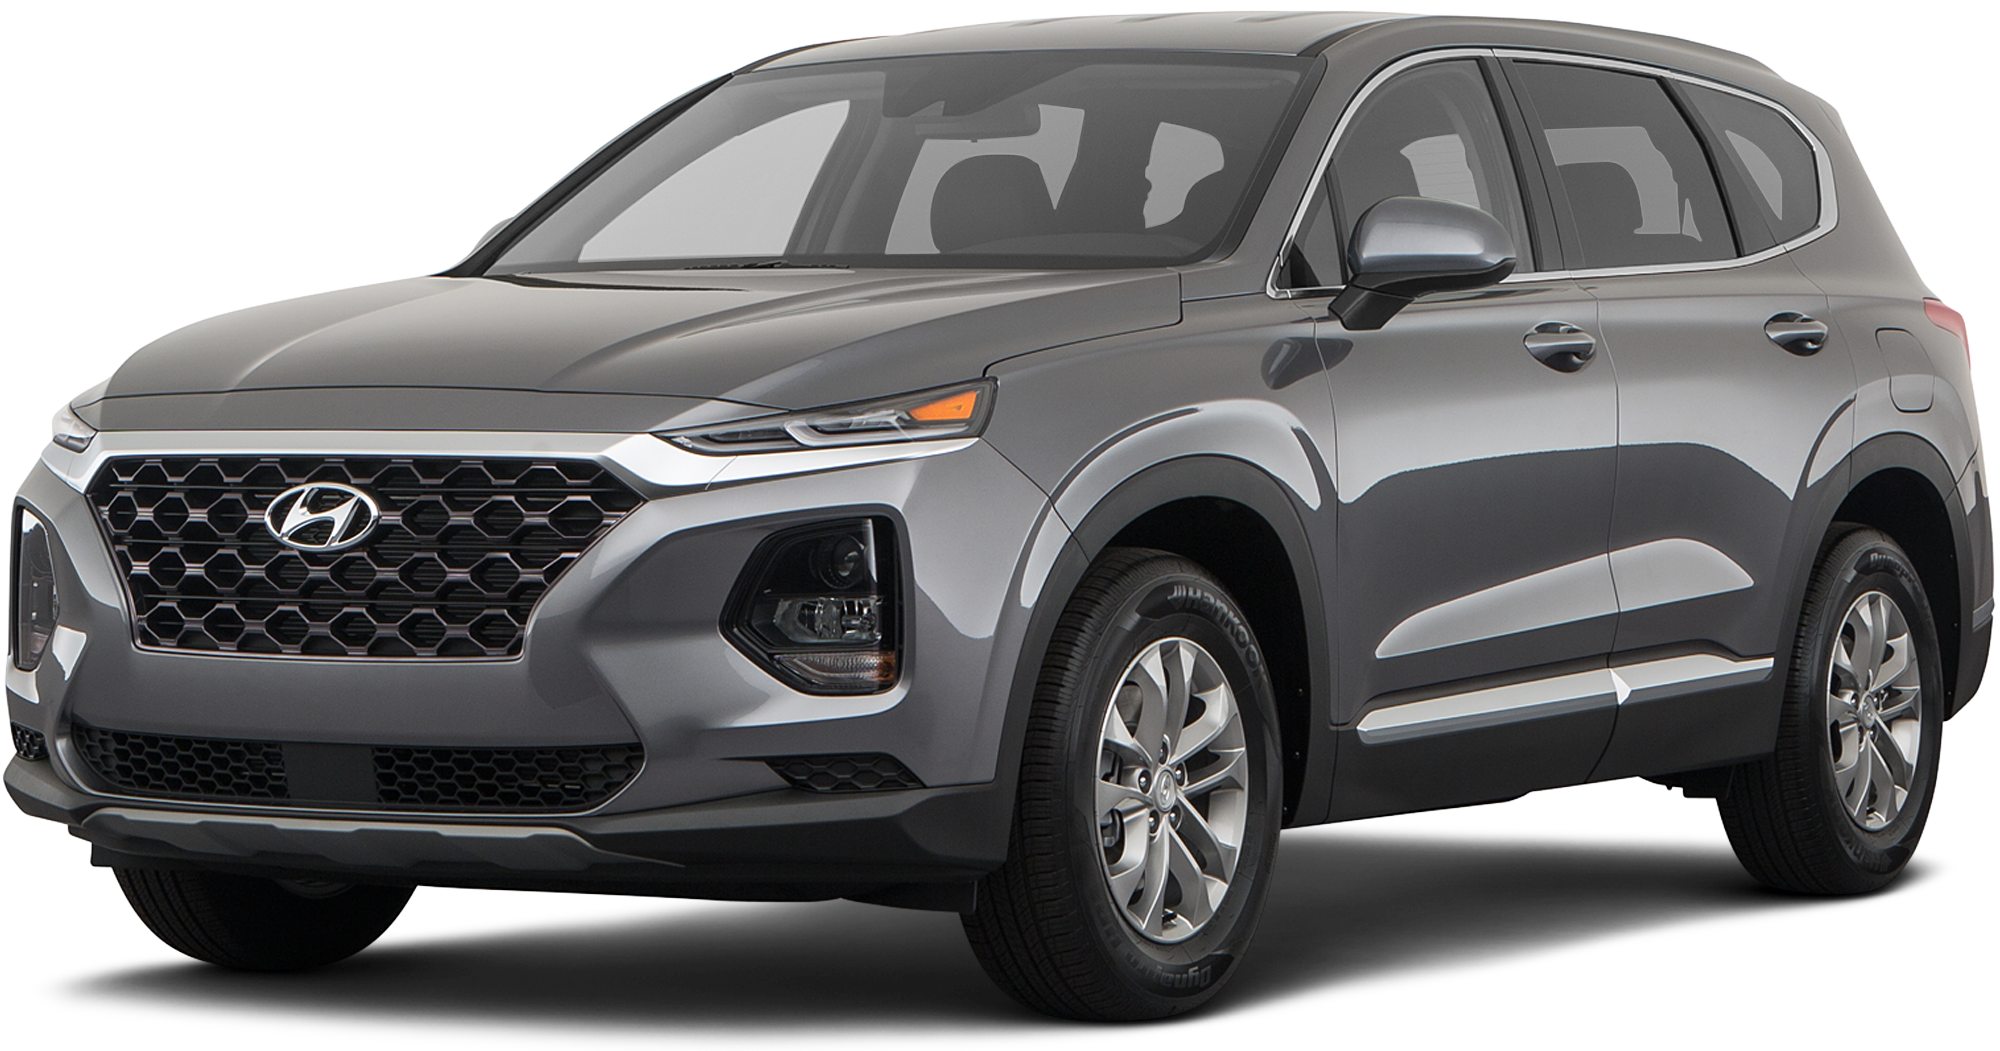 2020 Hyundai Santa Fe Incentives Specials amp Offers in Wilkes Barre PA